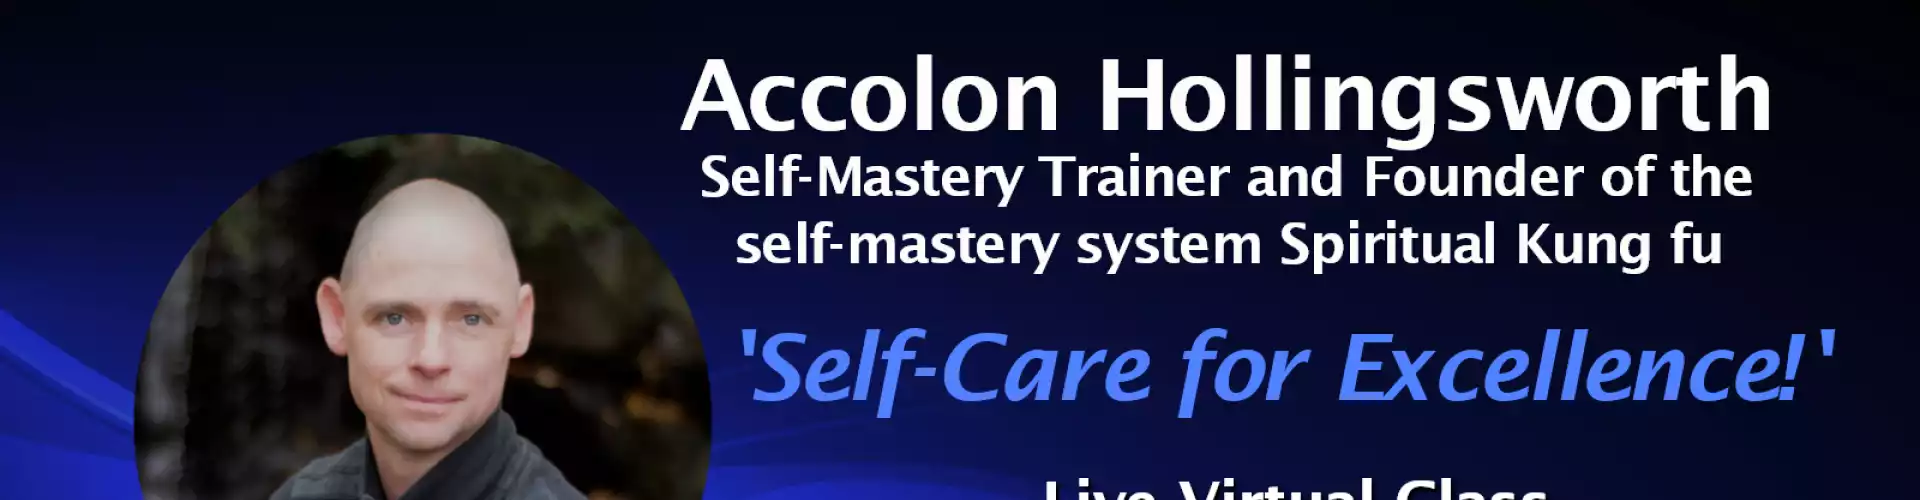 Self-Care for Excellence with WU Featured Expert Accolon Hollingsworth